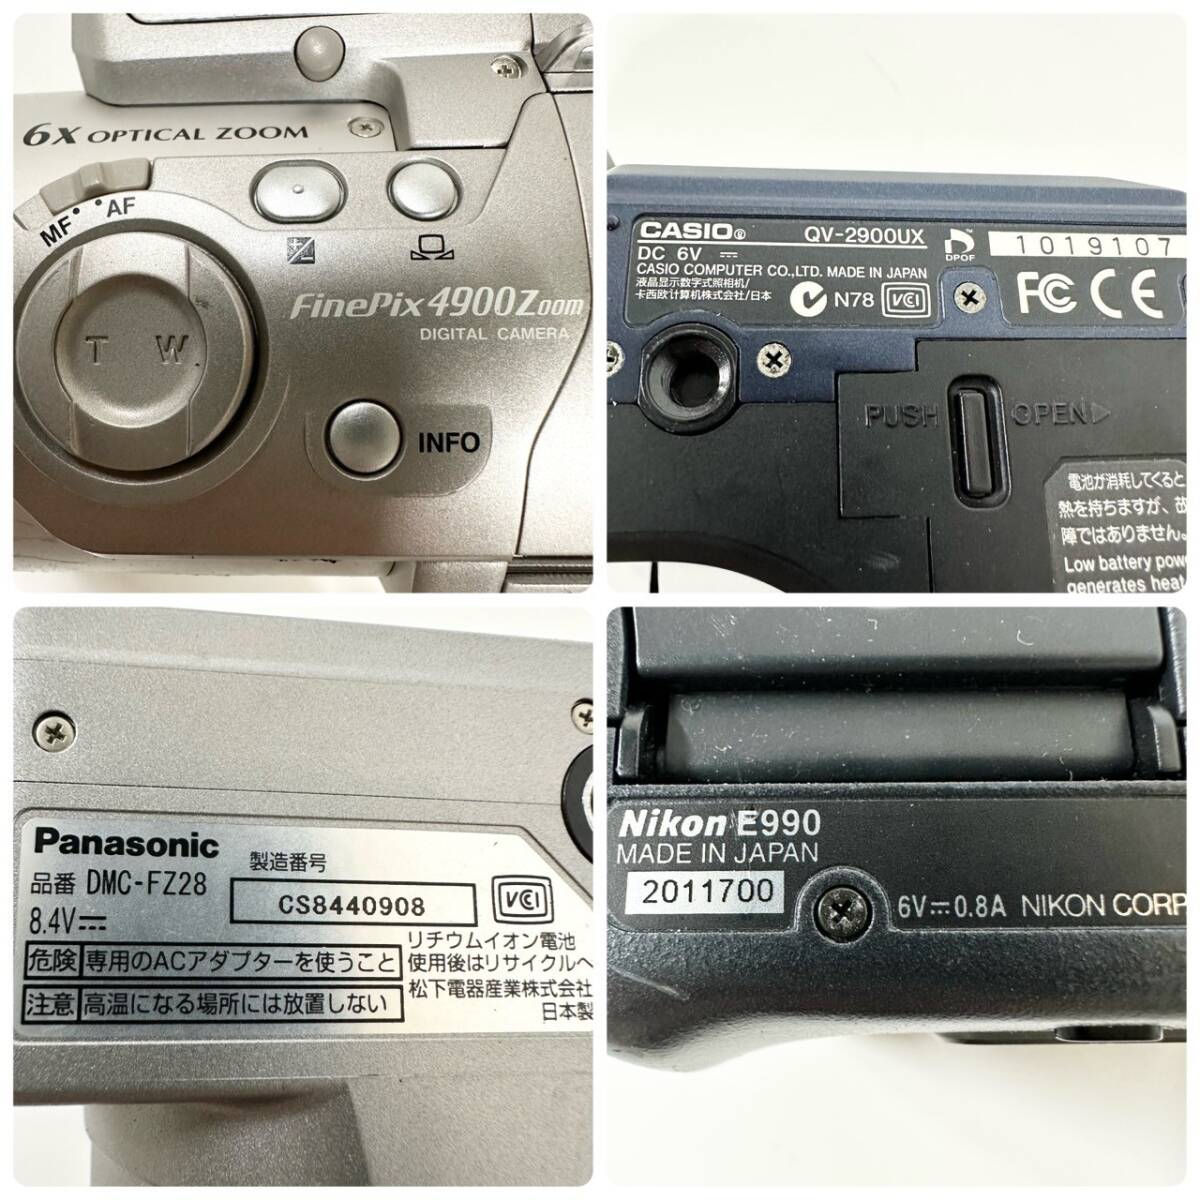 1 jpy ~[14 point ] digital camera set sale SONY Panasonic FUJIFILM CASIO Canon OLYMPUS Nikon accessory equipped including in a package un- possible HY